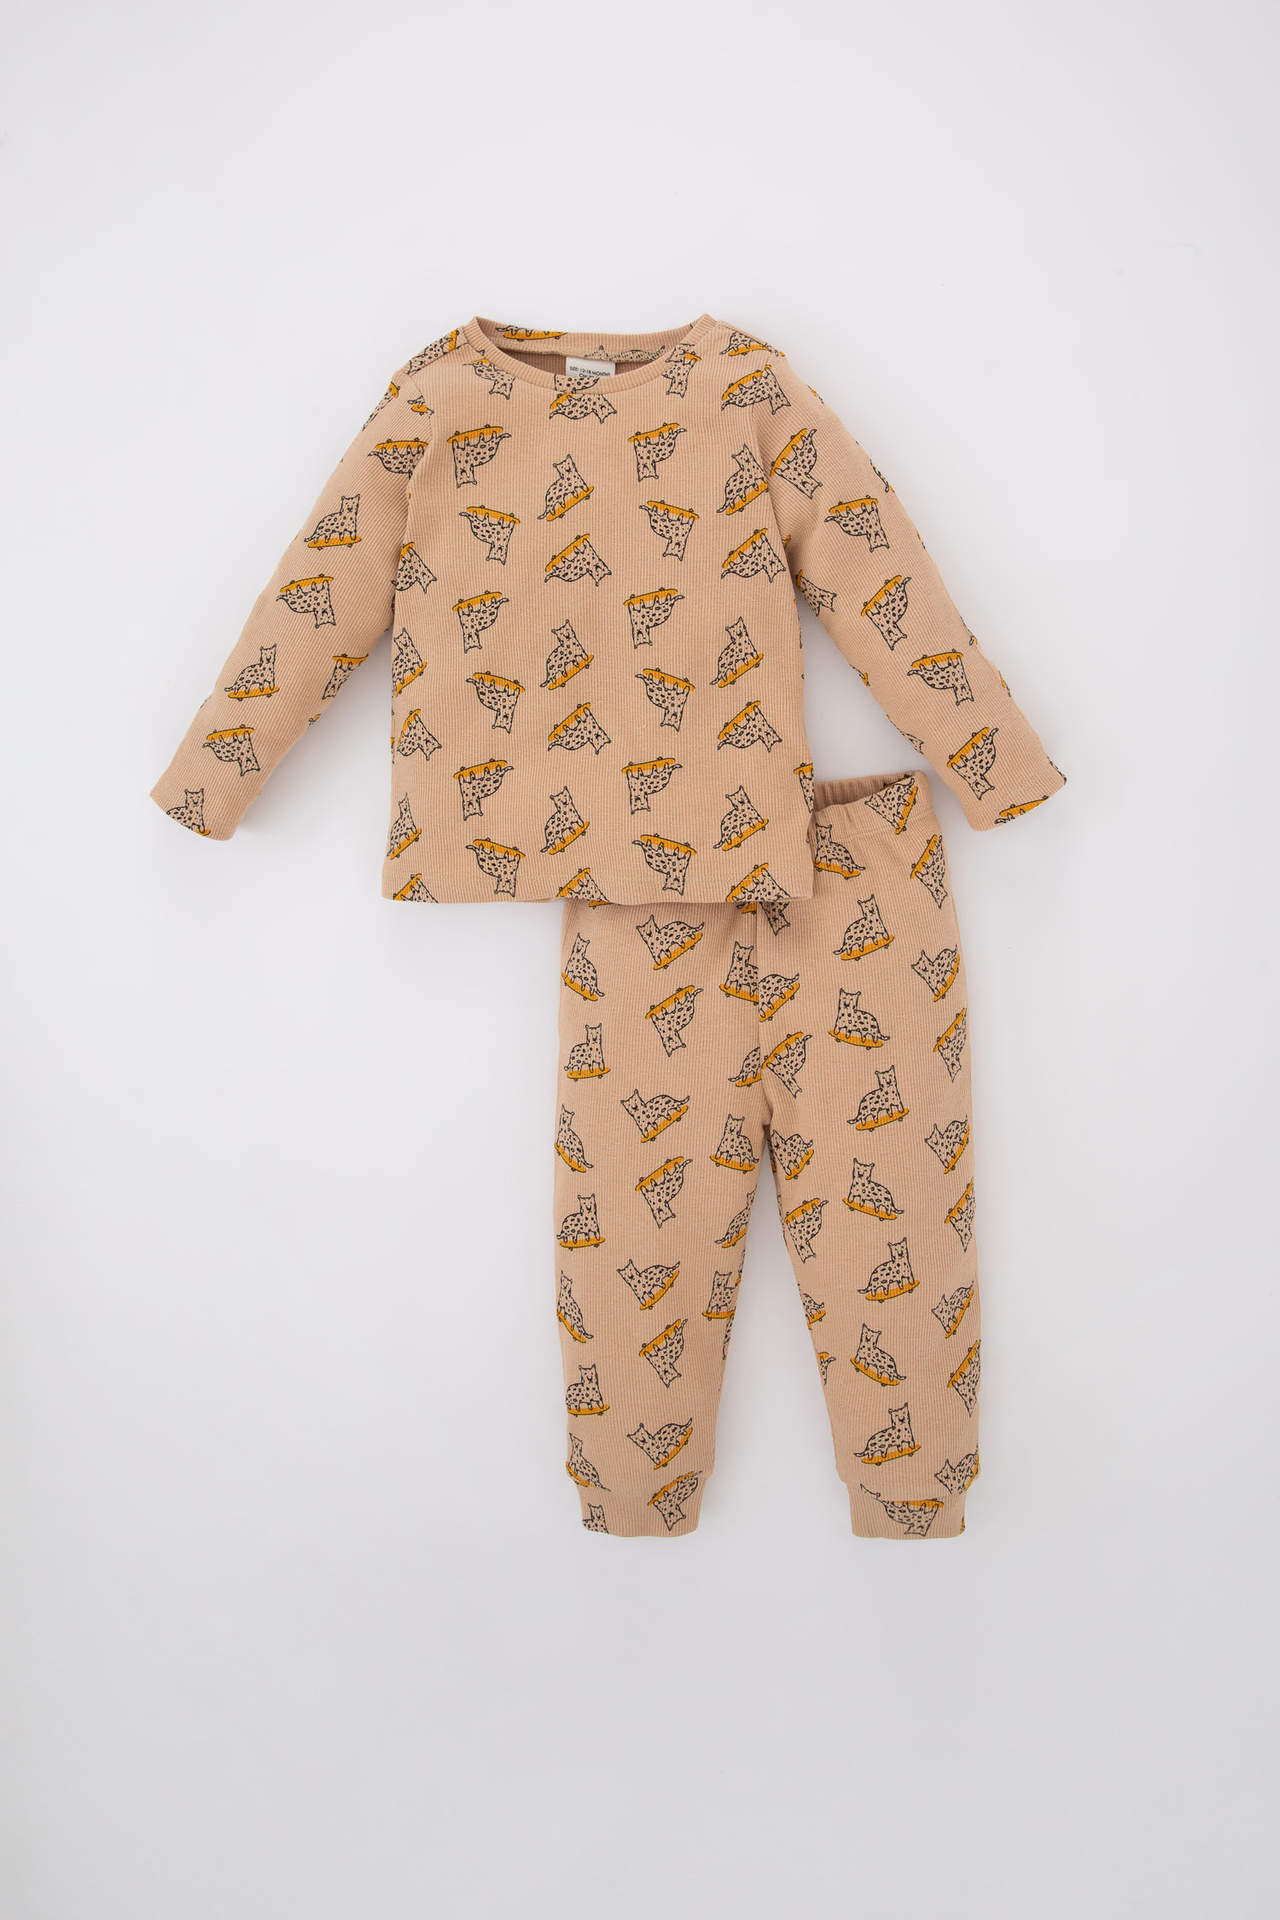 DEFACTO Baby Boy Crew Neck Animal Patterned Ribbed Camisole 2-pack Pajamas